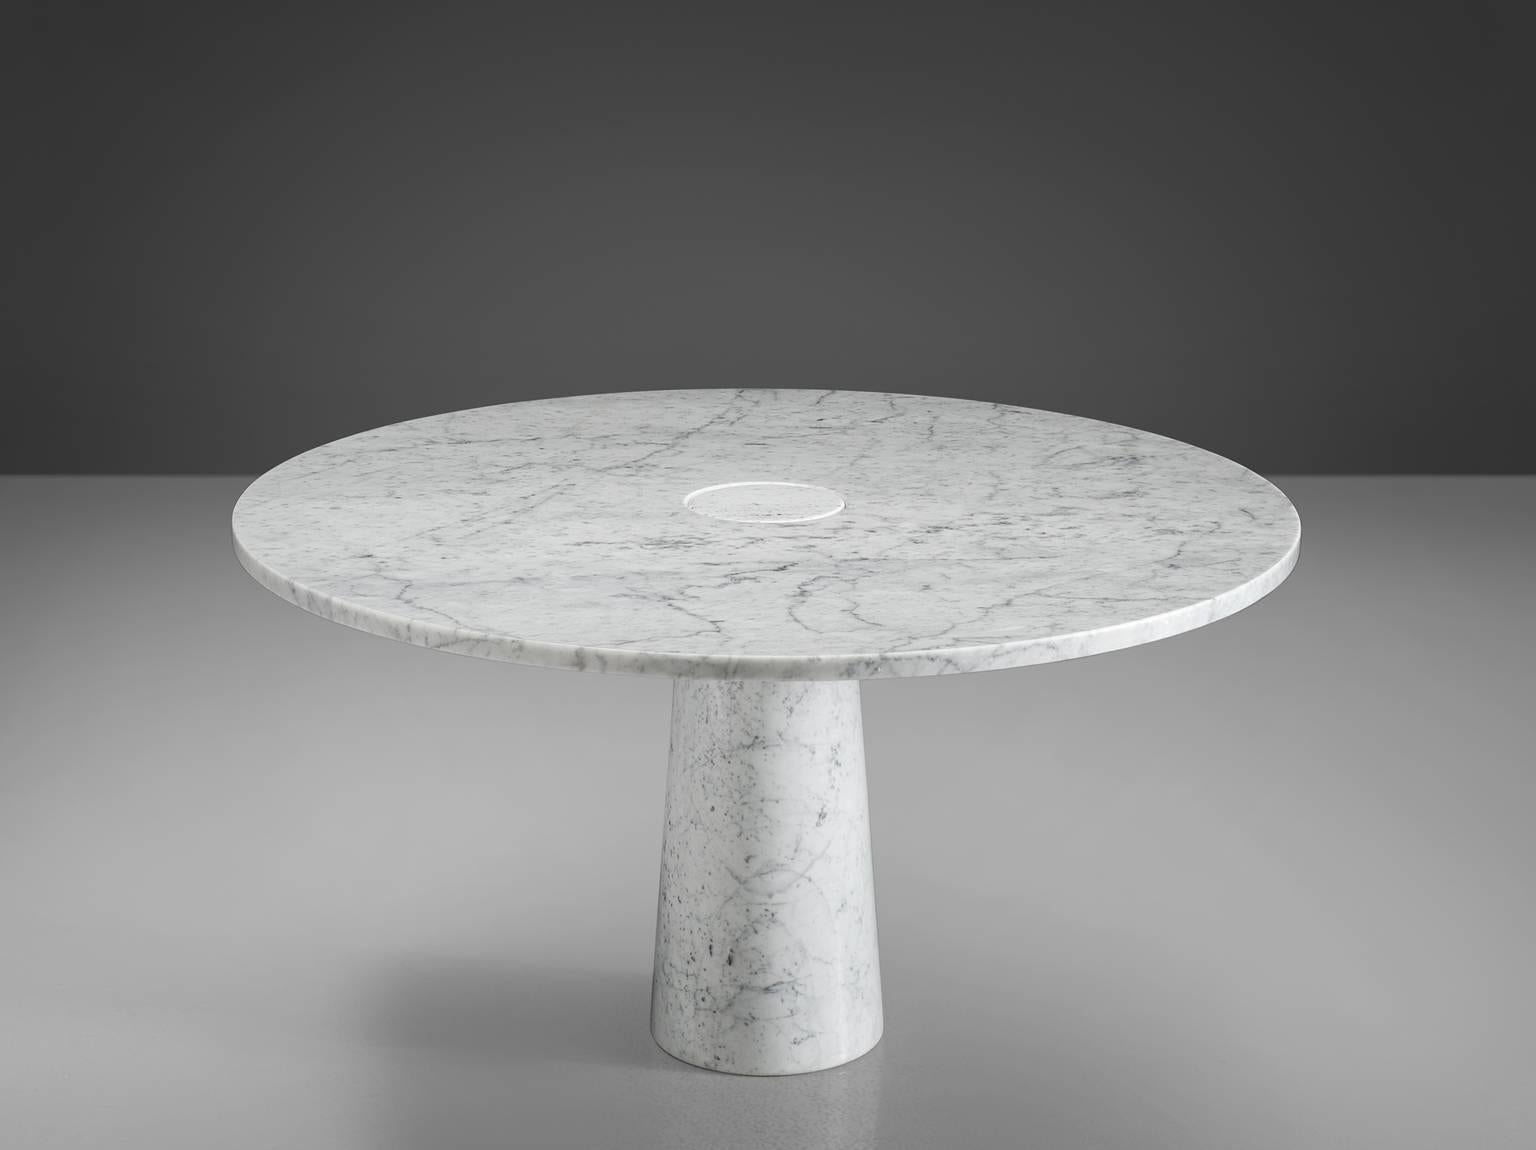 Dining table, marble, Italy, 1970s. 

This architectural table is a skilful example of postmodern design. The circular table features no joints or clamps and is architectural in its structure featuring one single column that is attached to the top